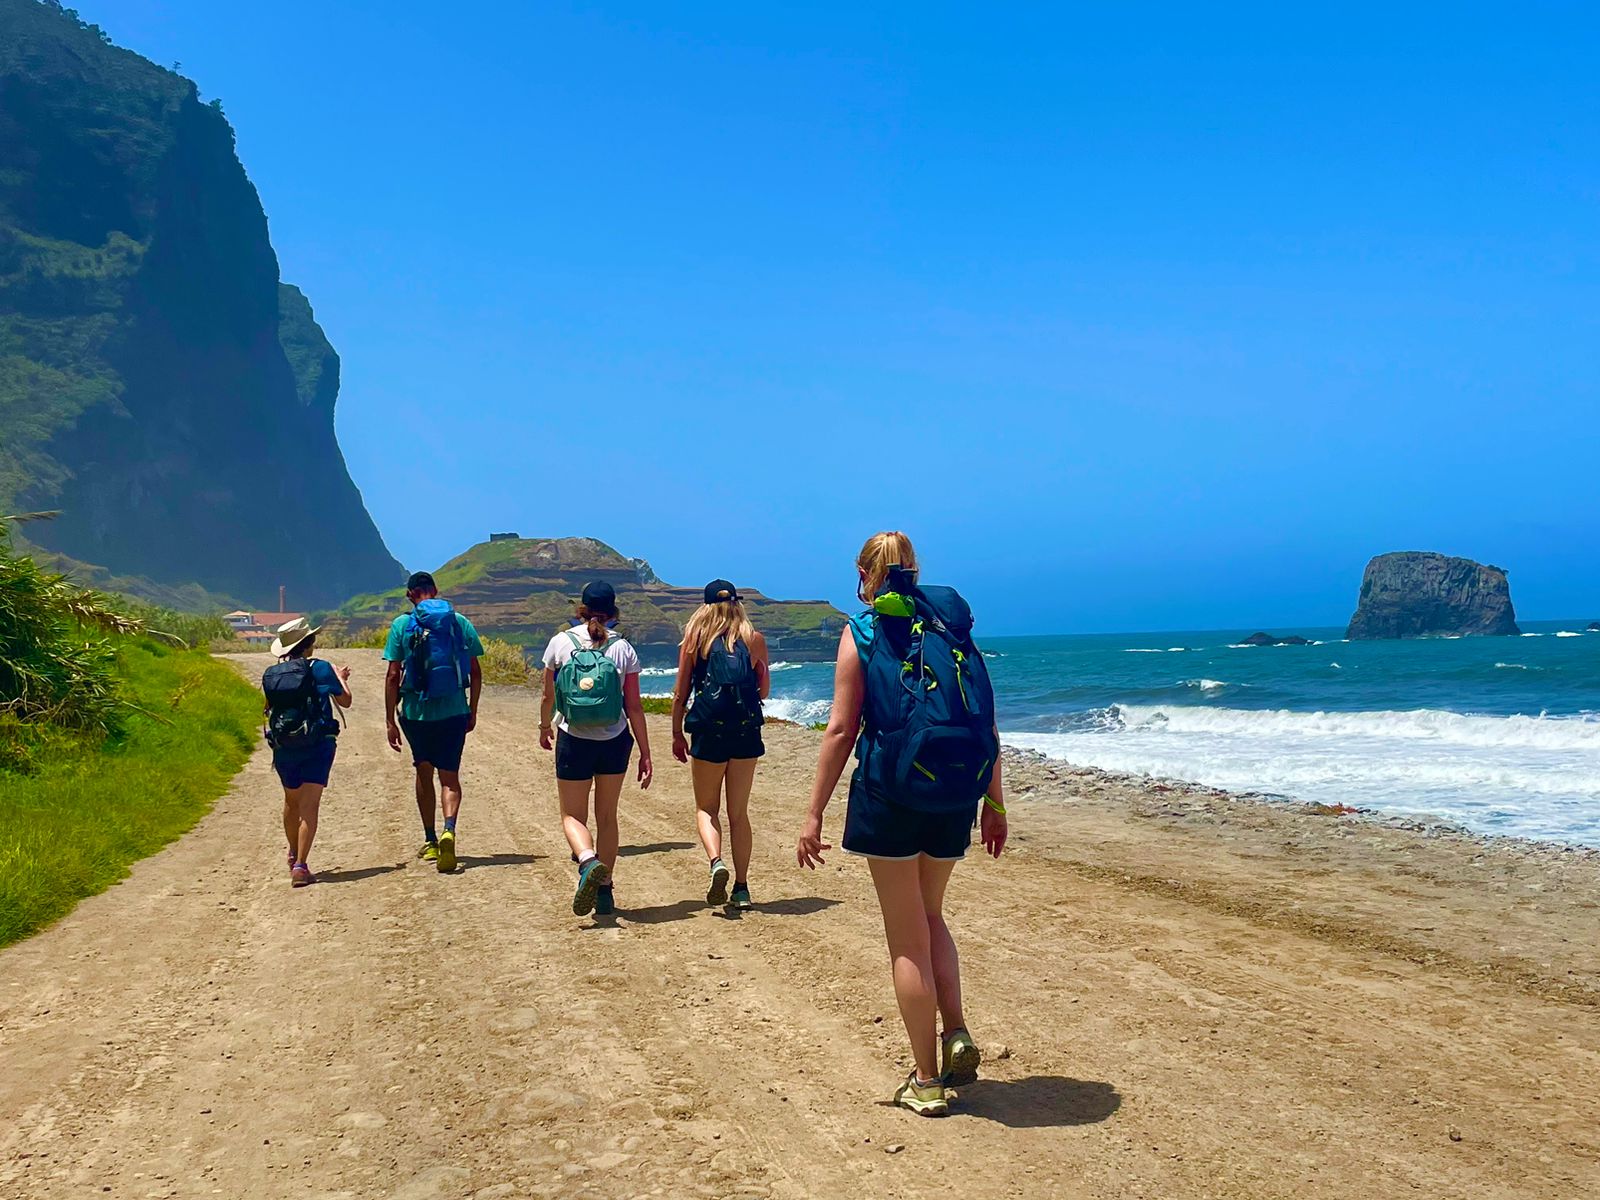 Hikers on the beach next to the ocean, Madeira